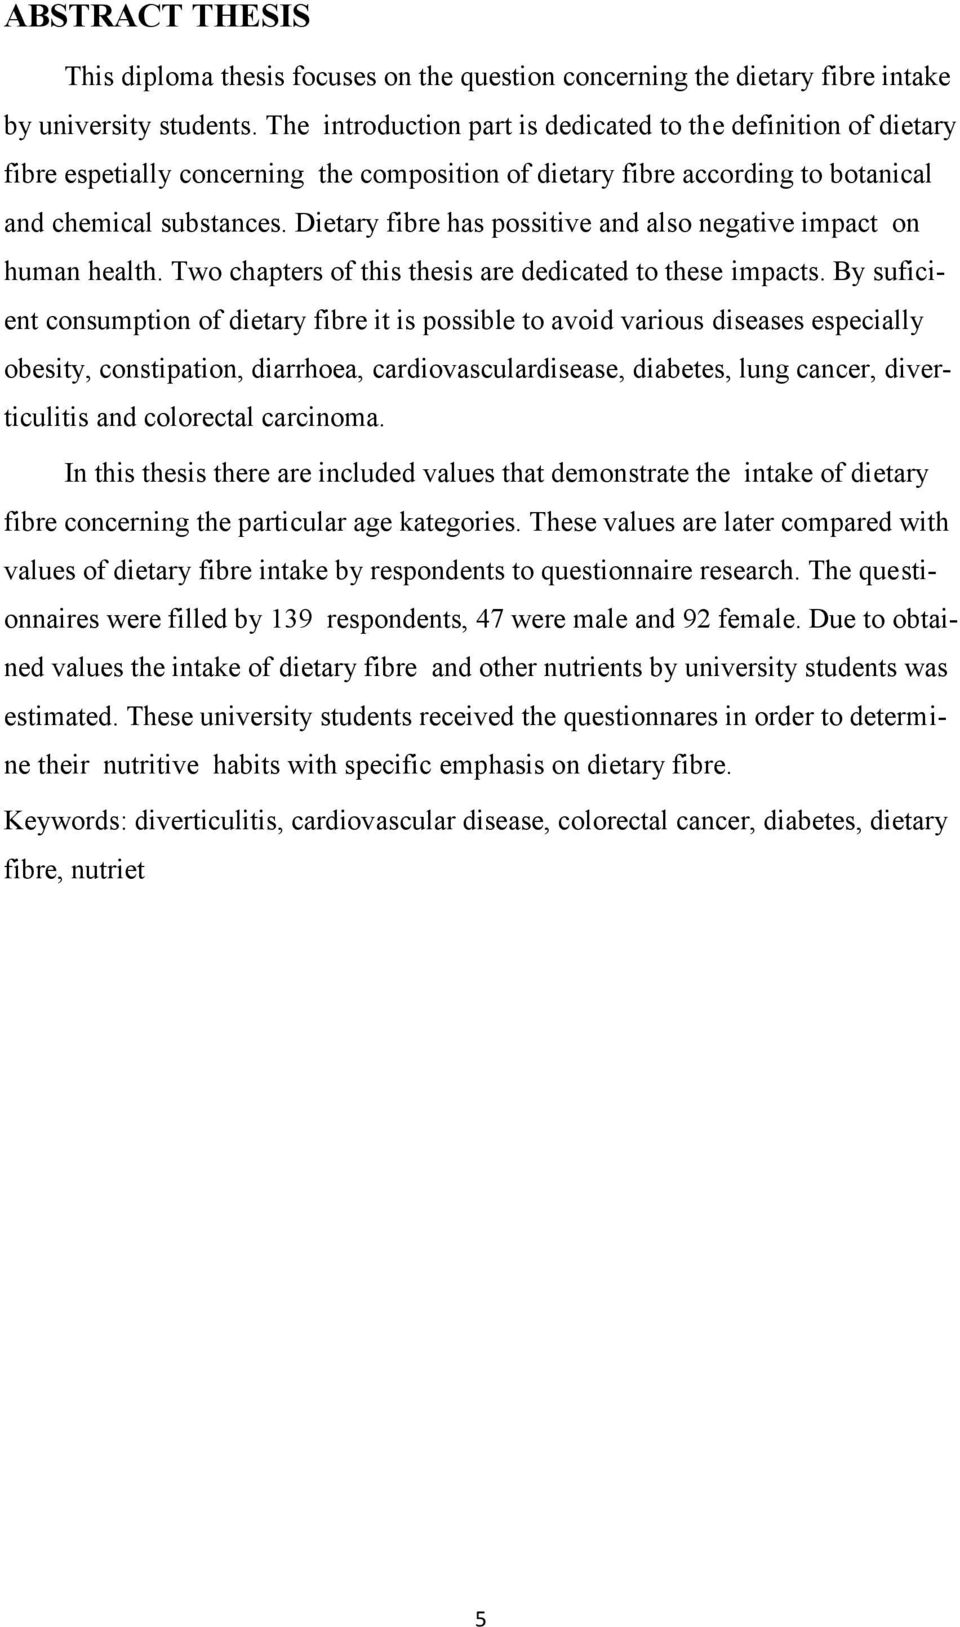 Dietary fibre has possitive and also negative impact on human health. Two chapters of this thesis are dedicated to these impacts.